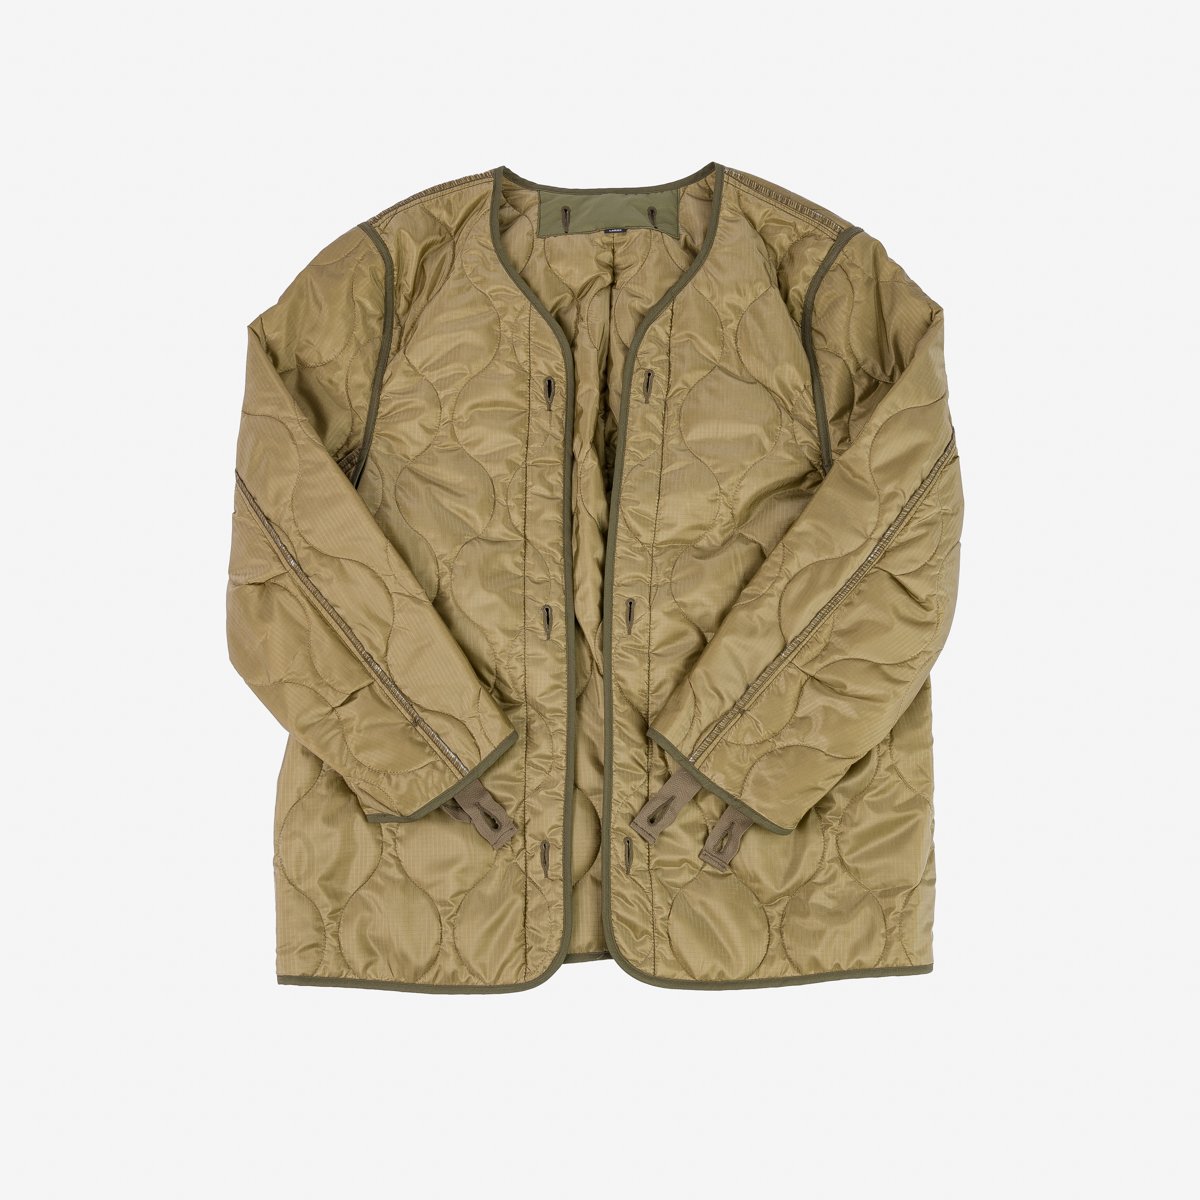 Quilt Lining M65 Field Jacket - Olive Drab Green